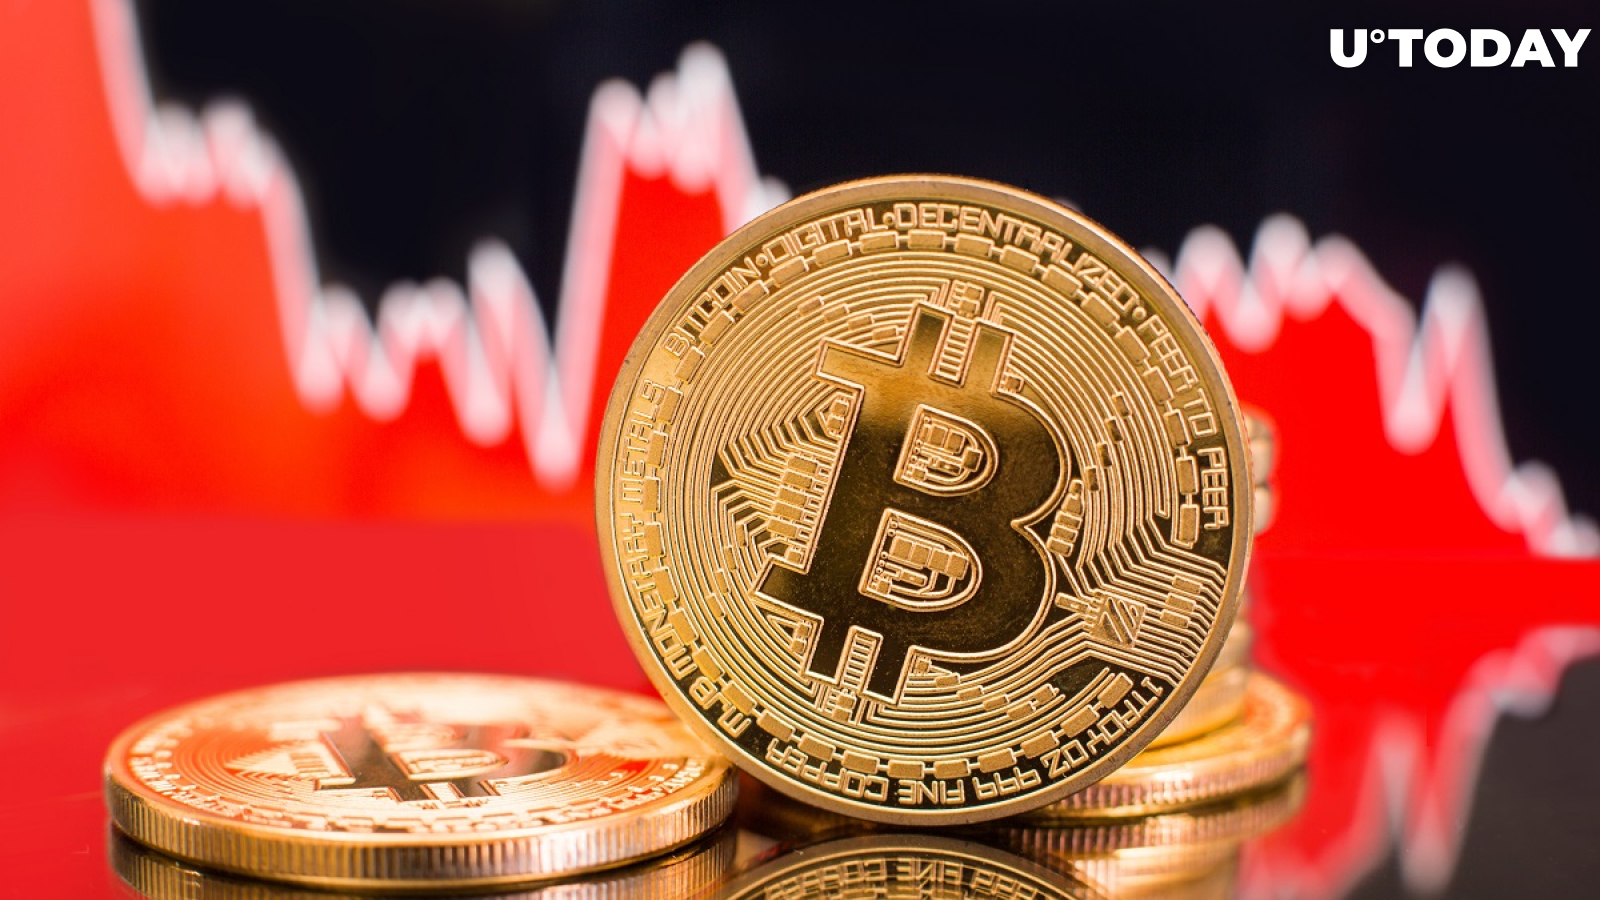 Bitcoin Collapses to $37K as Miners Start Dumping Their Coins